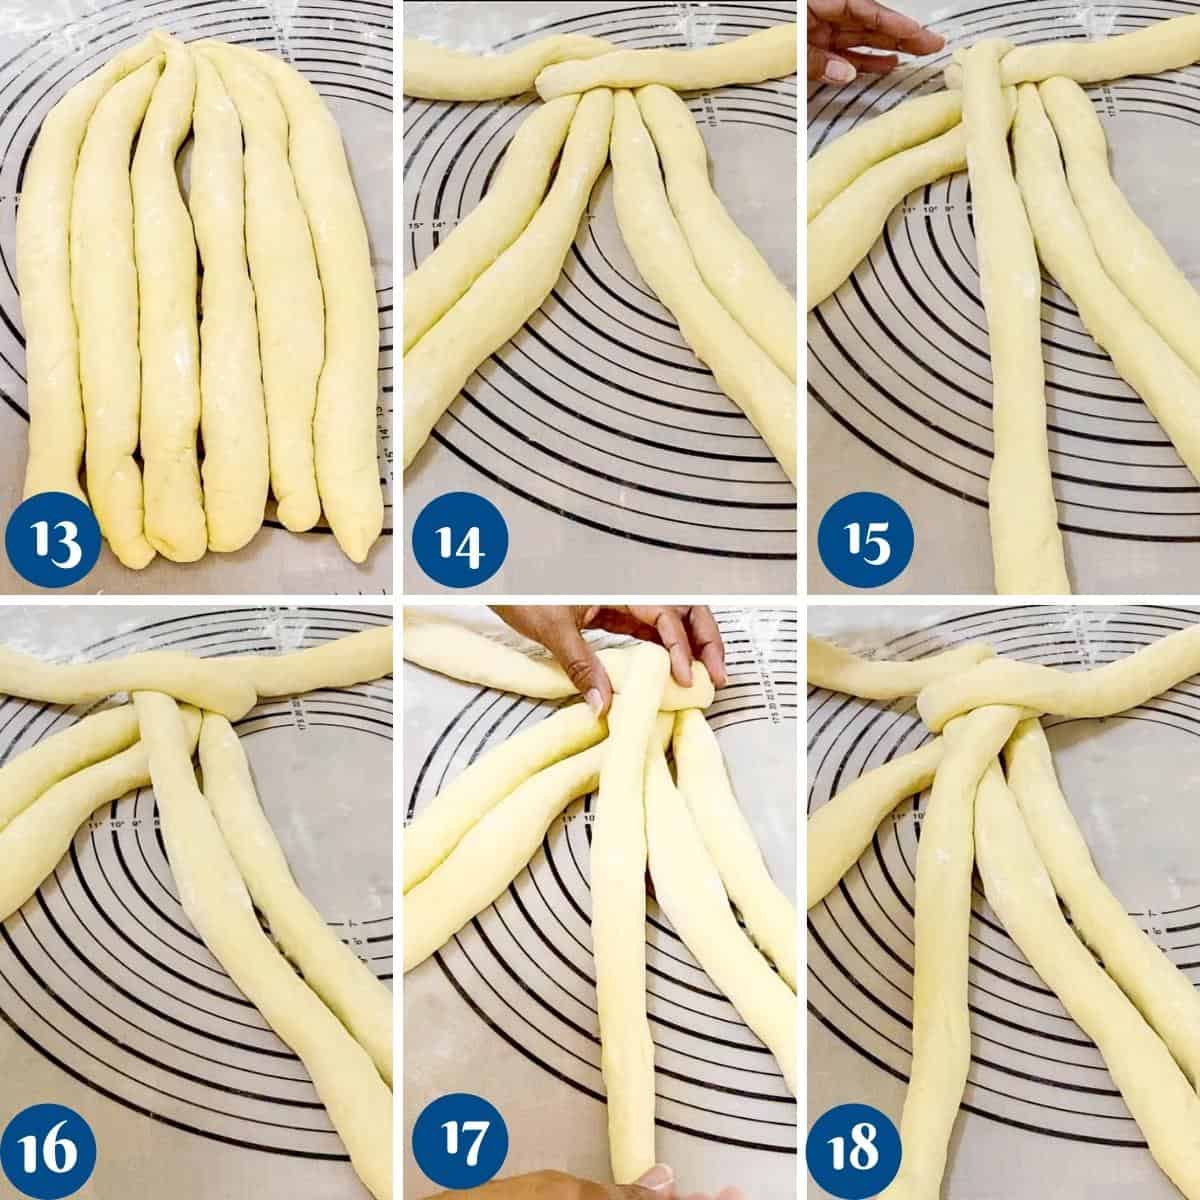 Progress pictures showing how to braided the size braid challah.